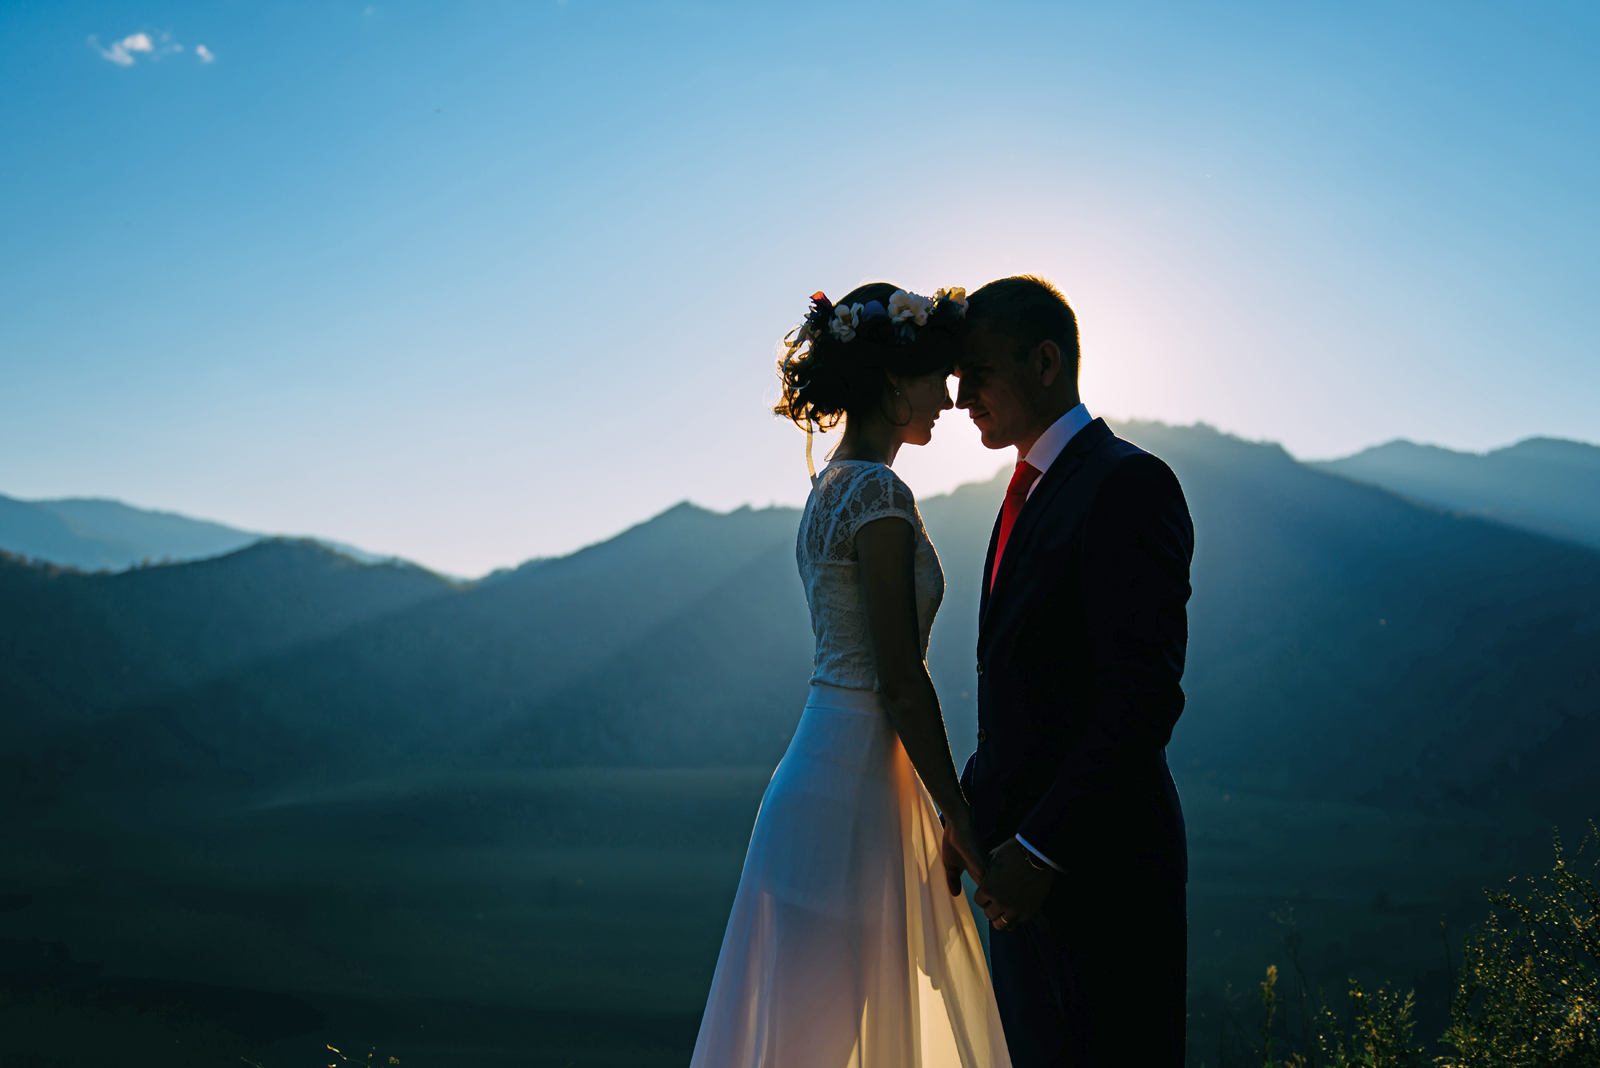 Getting married in the Hautes-Pyrénées